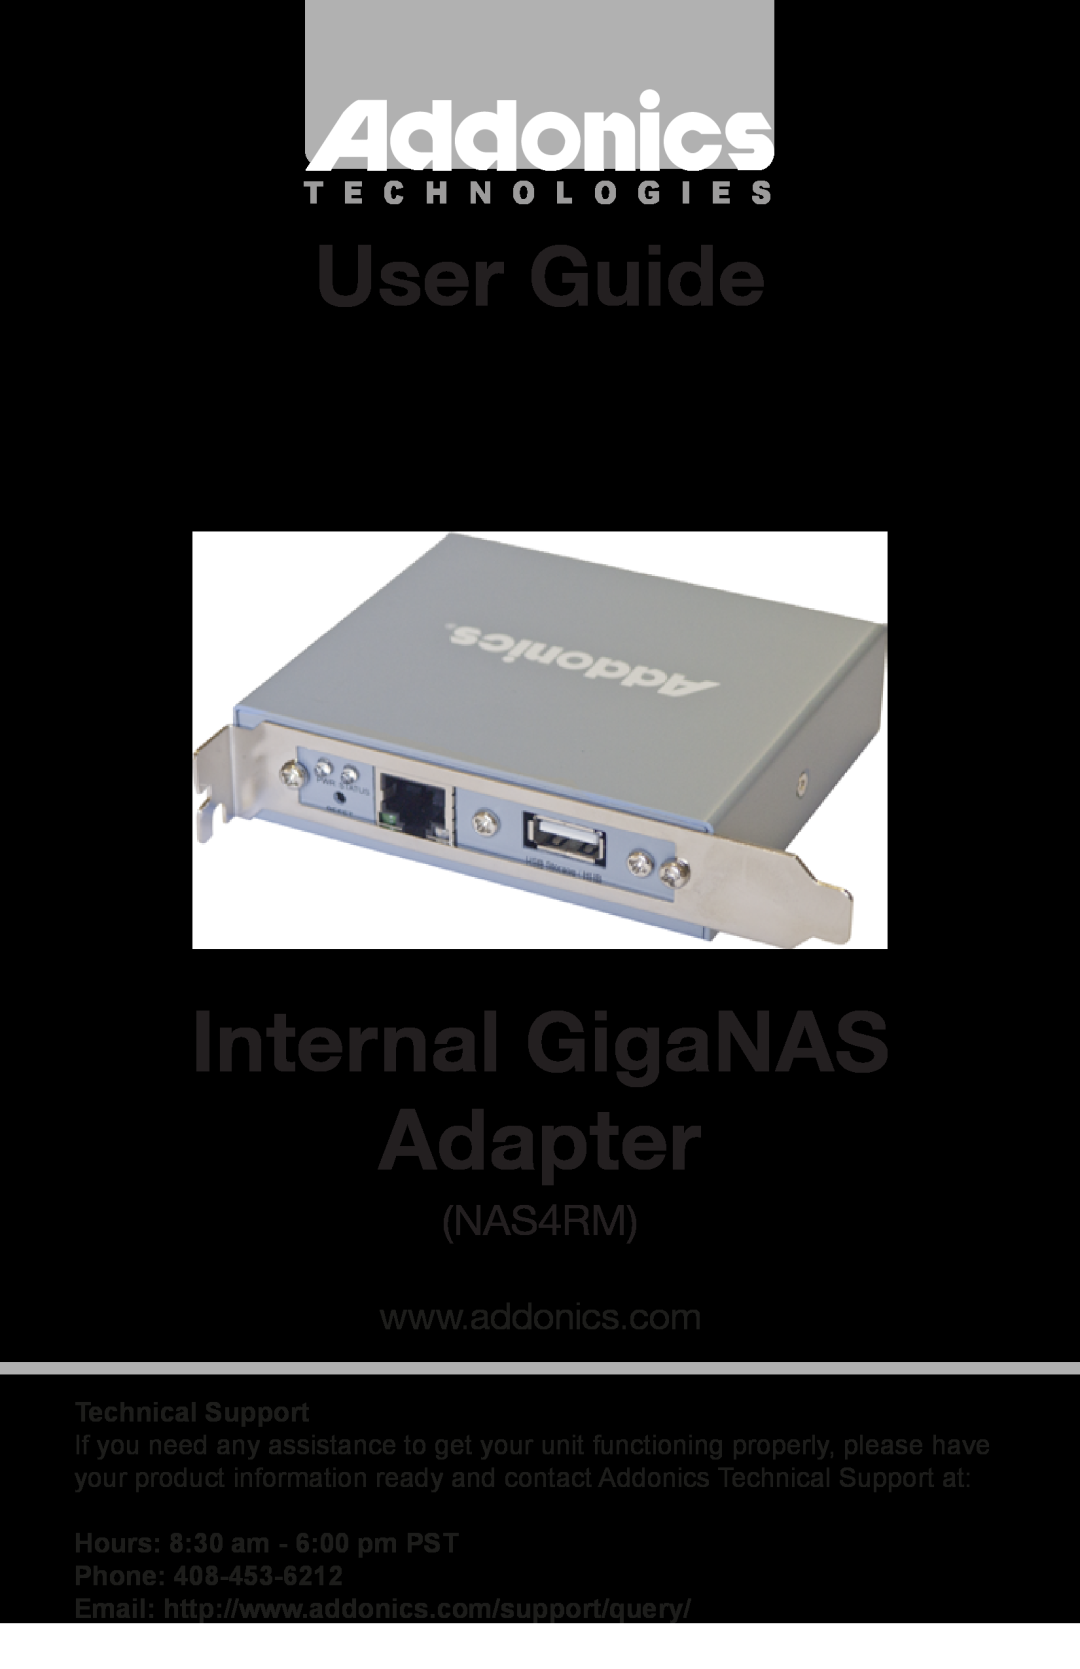 Addonics Technologies NAS4RM manual User Guide Internal GigaNAS Adapter, T E C H N O L O G I E S, Technical Support 